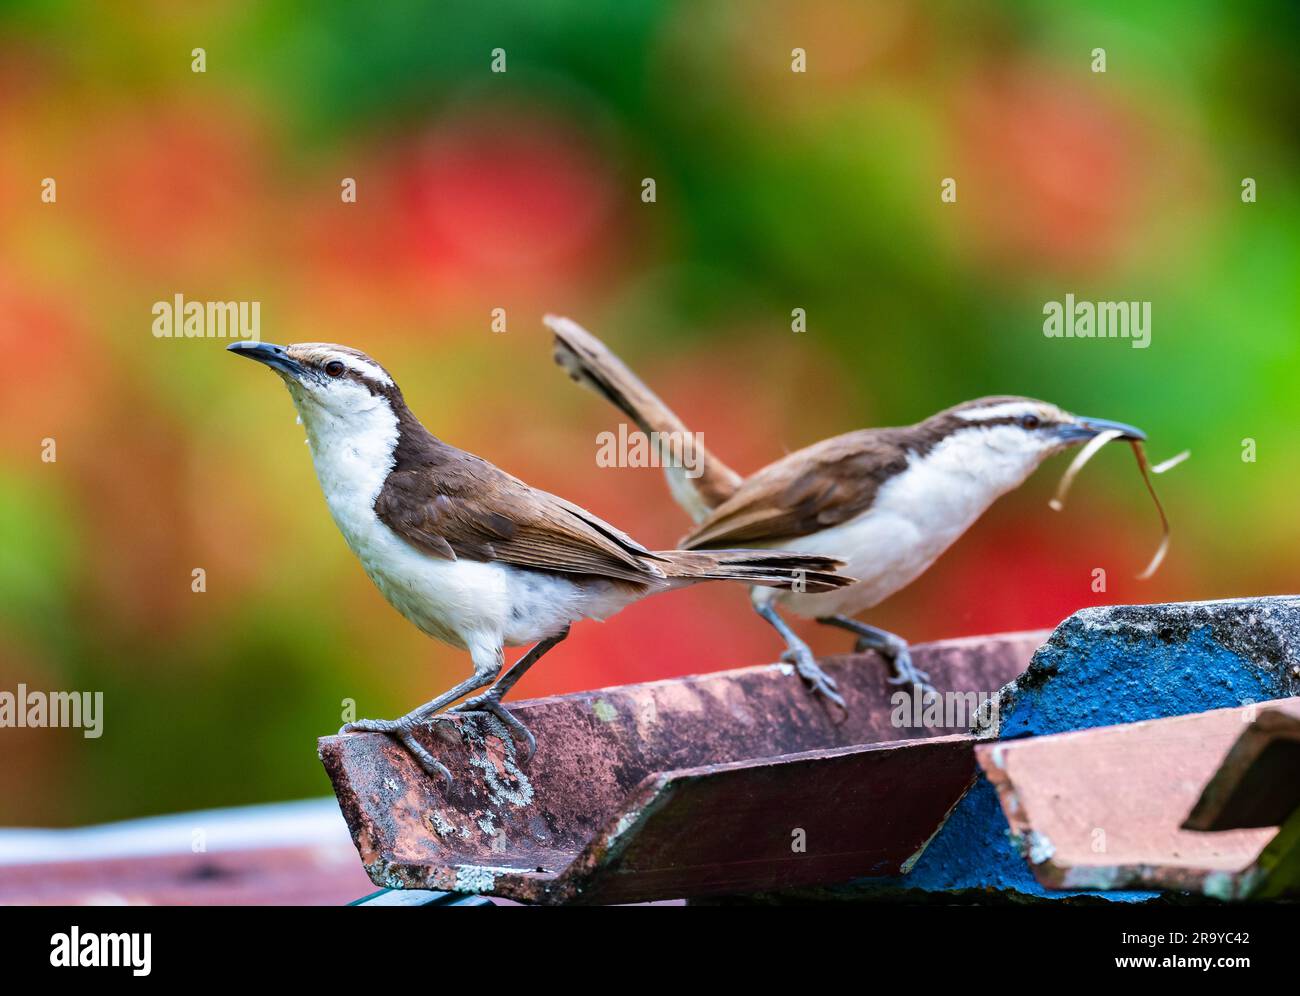 A pair Bicolored Wrens (Campylorhynchus griseus) collecting nesting material. Colombia, South America. Stock Photo